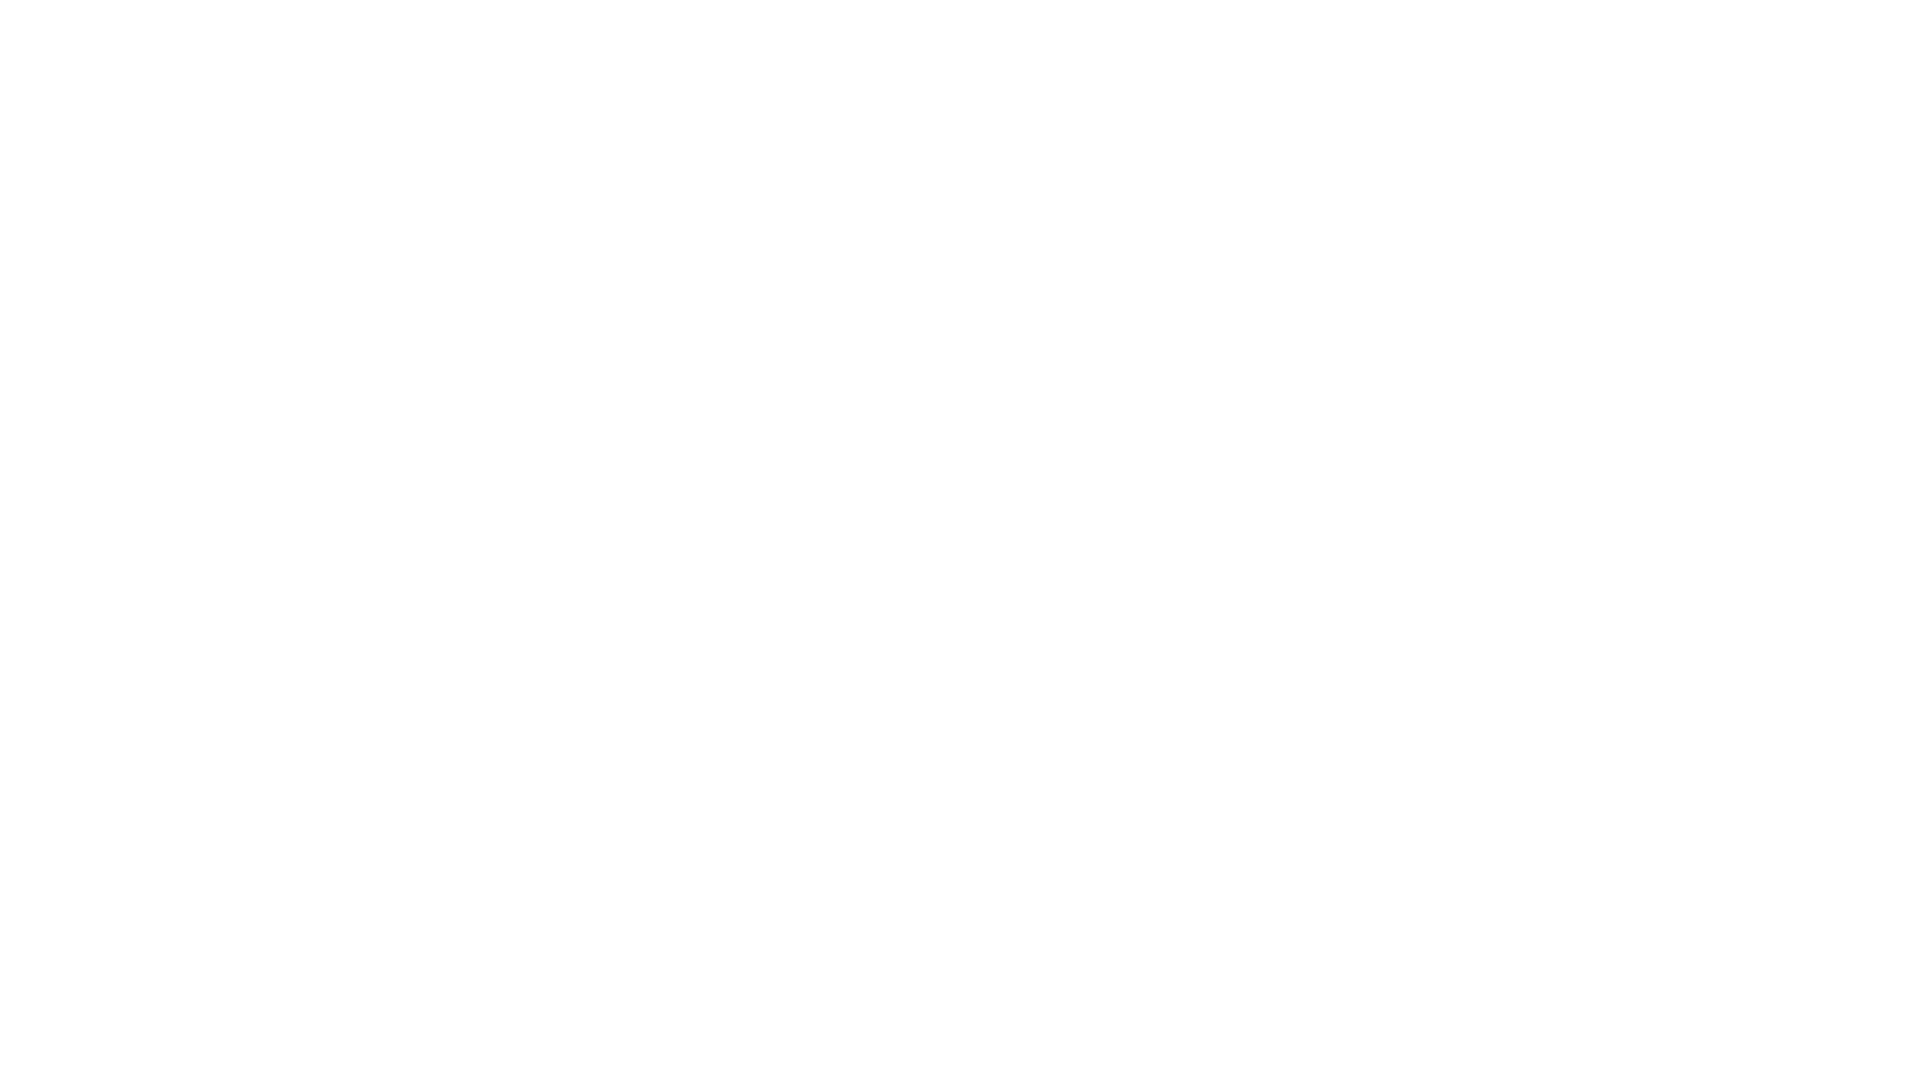 The Lighthouse Art Lovers (wit logo)